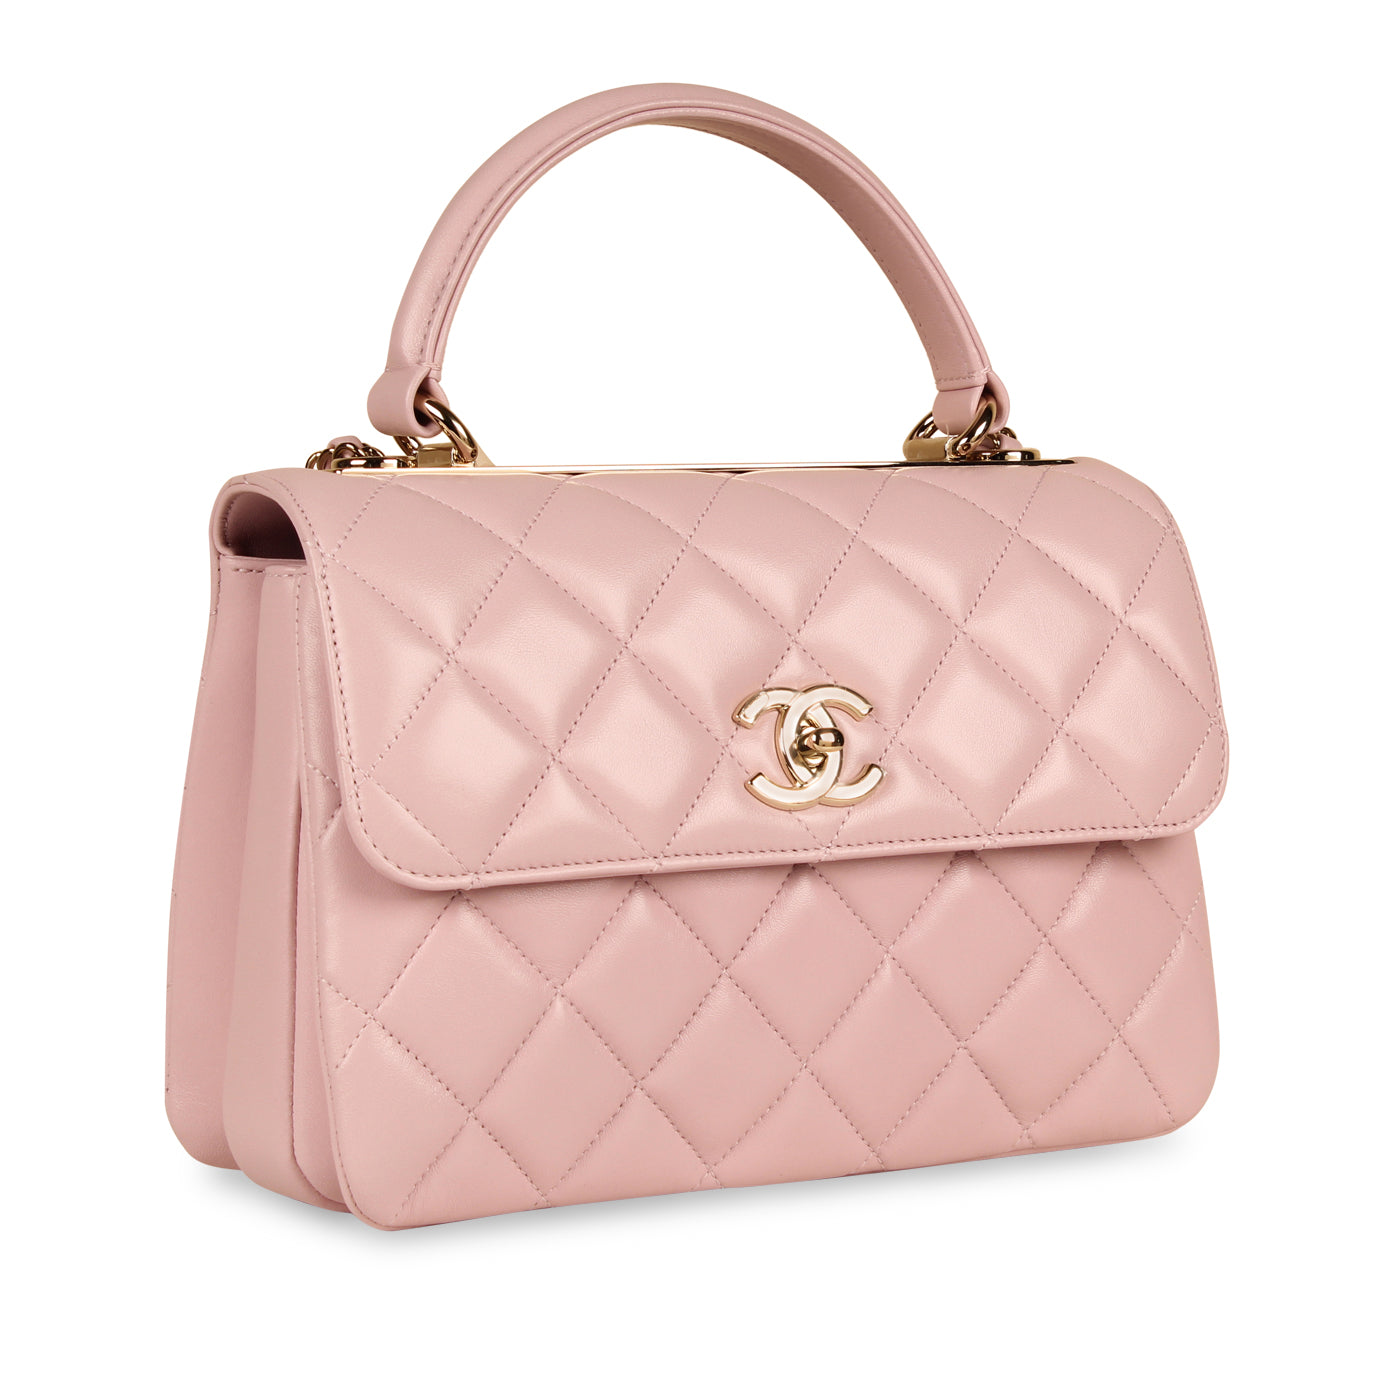 Chanel Trendy CC Small Flap Top Handle Bag A92236 Light Pink/Gold